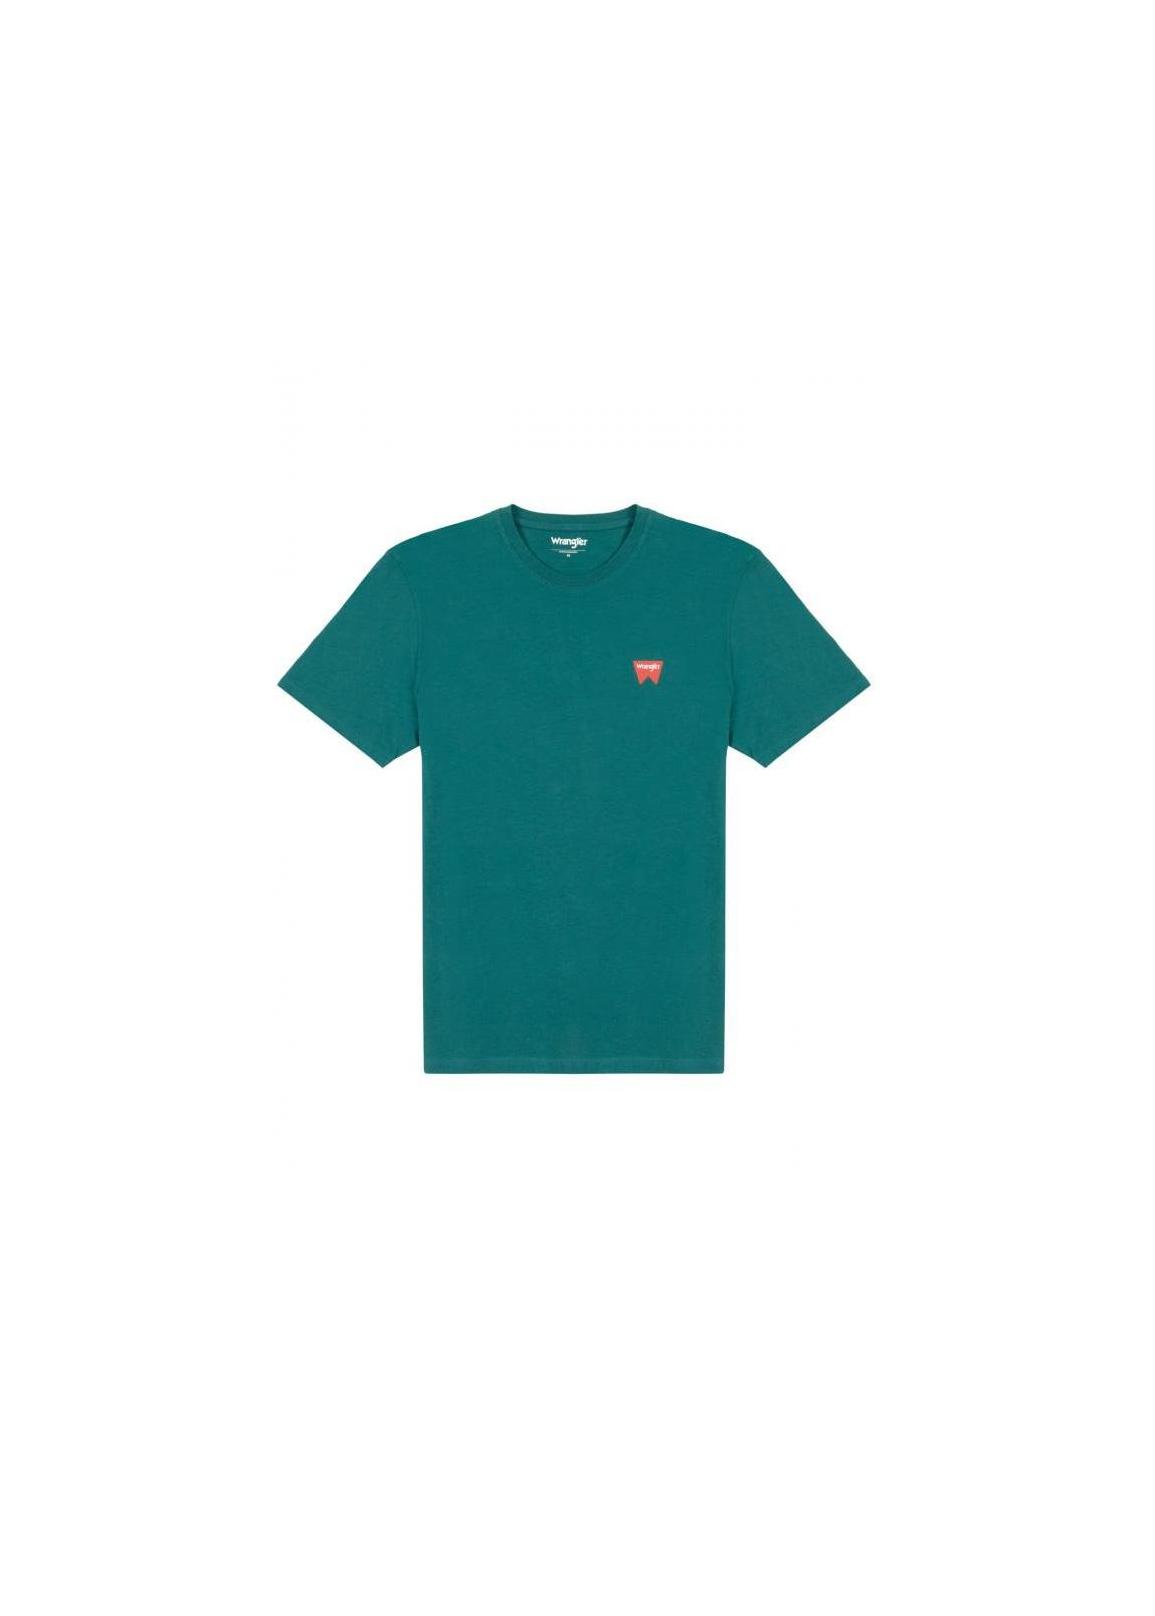 Wrangler® Sign Off Tee - Bayberry Green